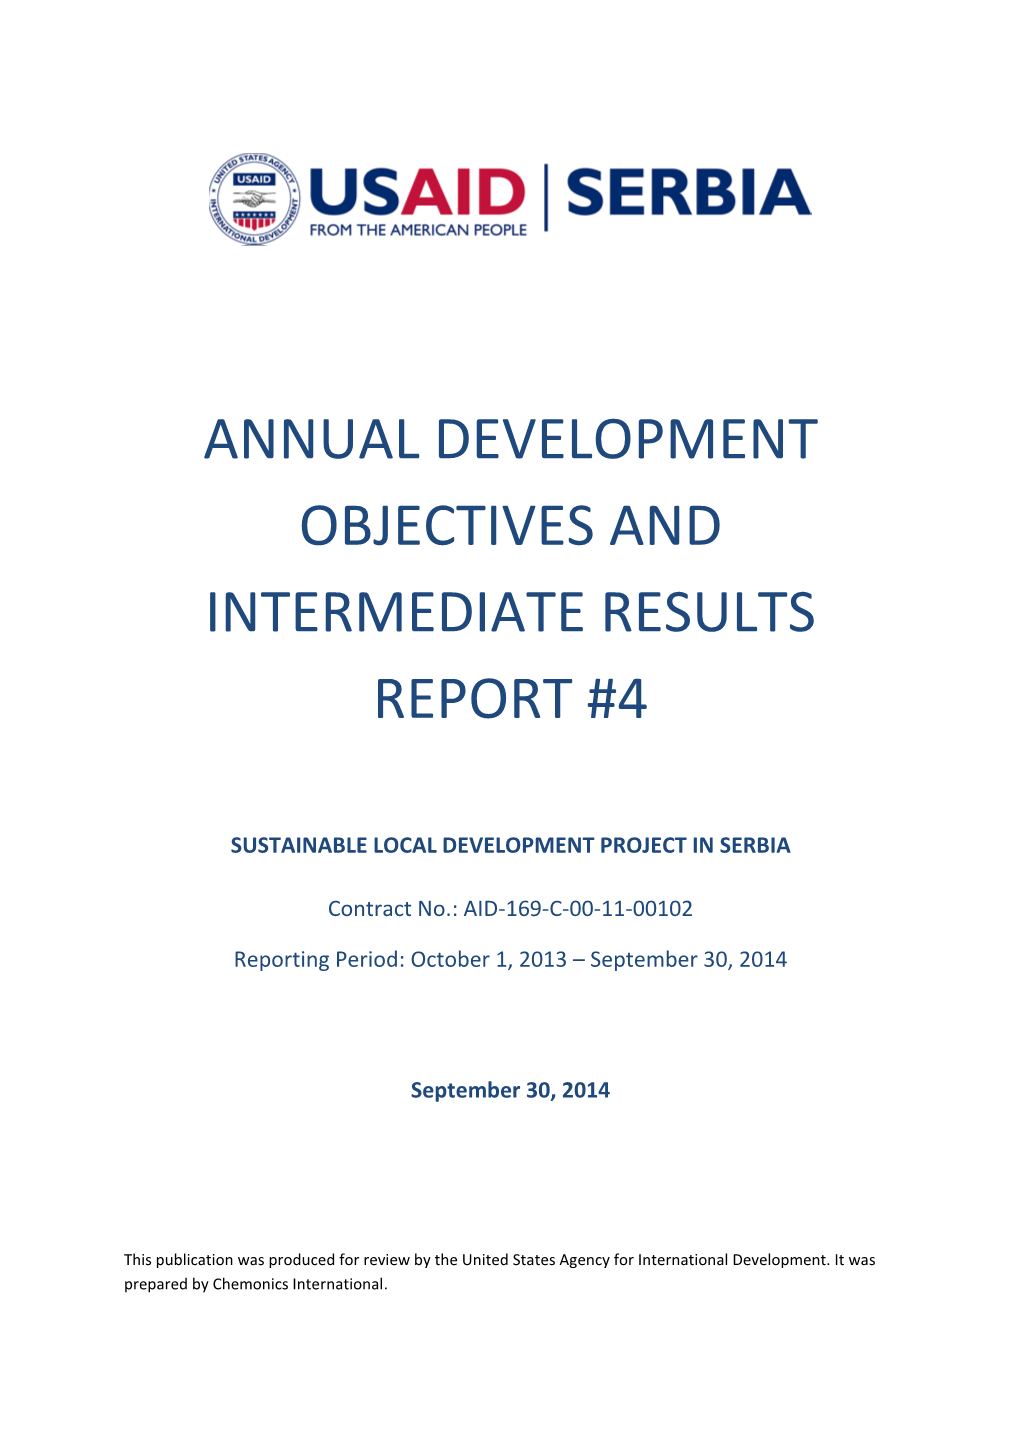 Annual Development Objectives and Intermediate Results Report #4